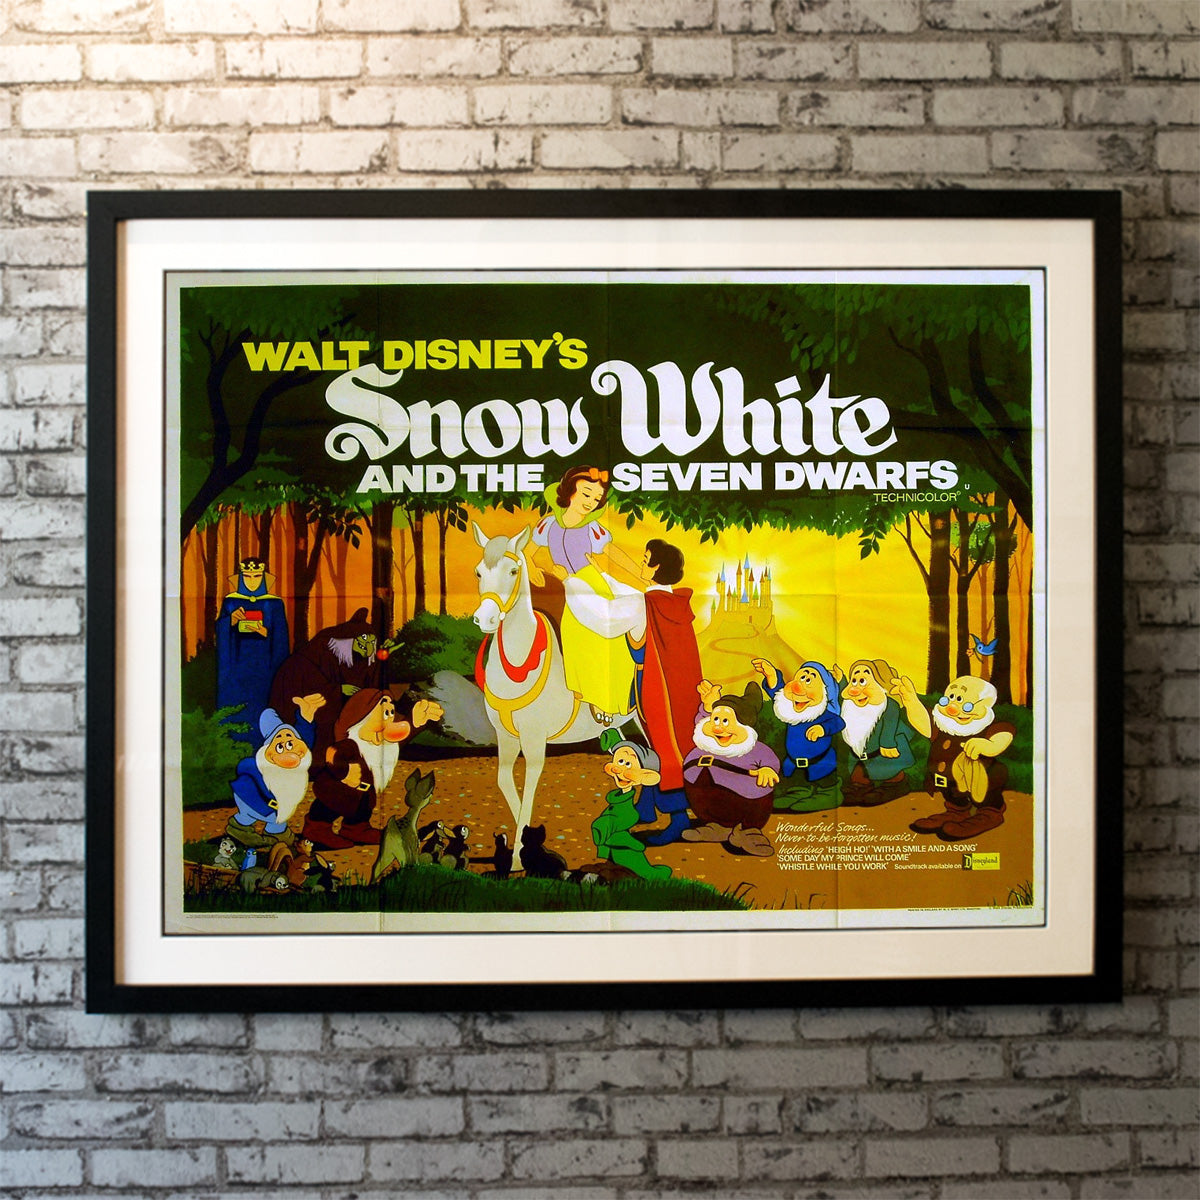 Original Movie Poster of Snow White And The Seven Dwarfs (1972R)